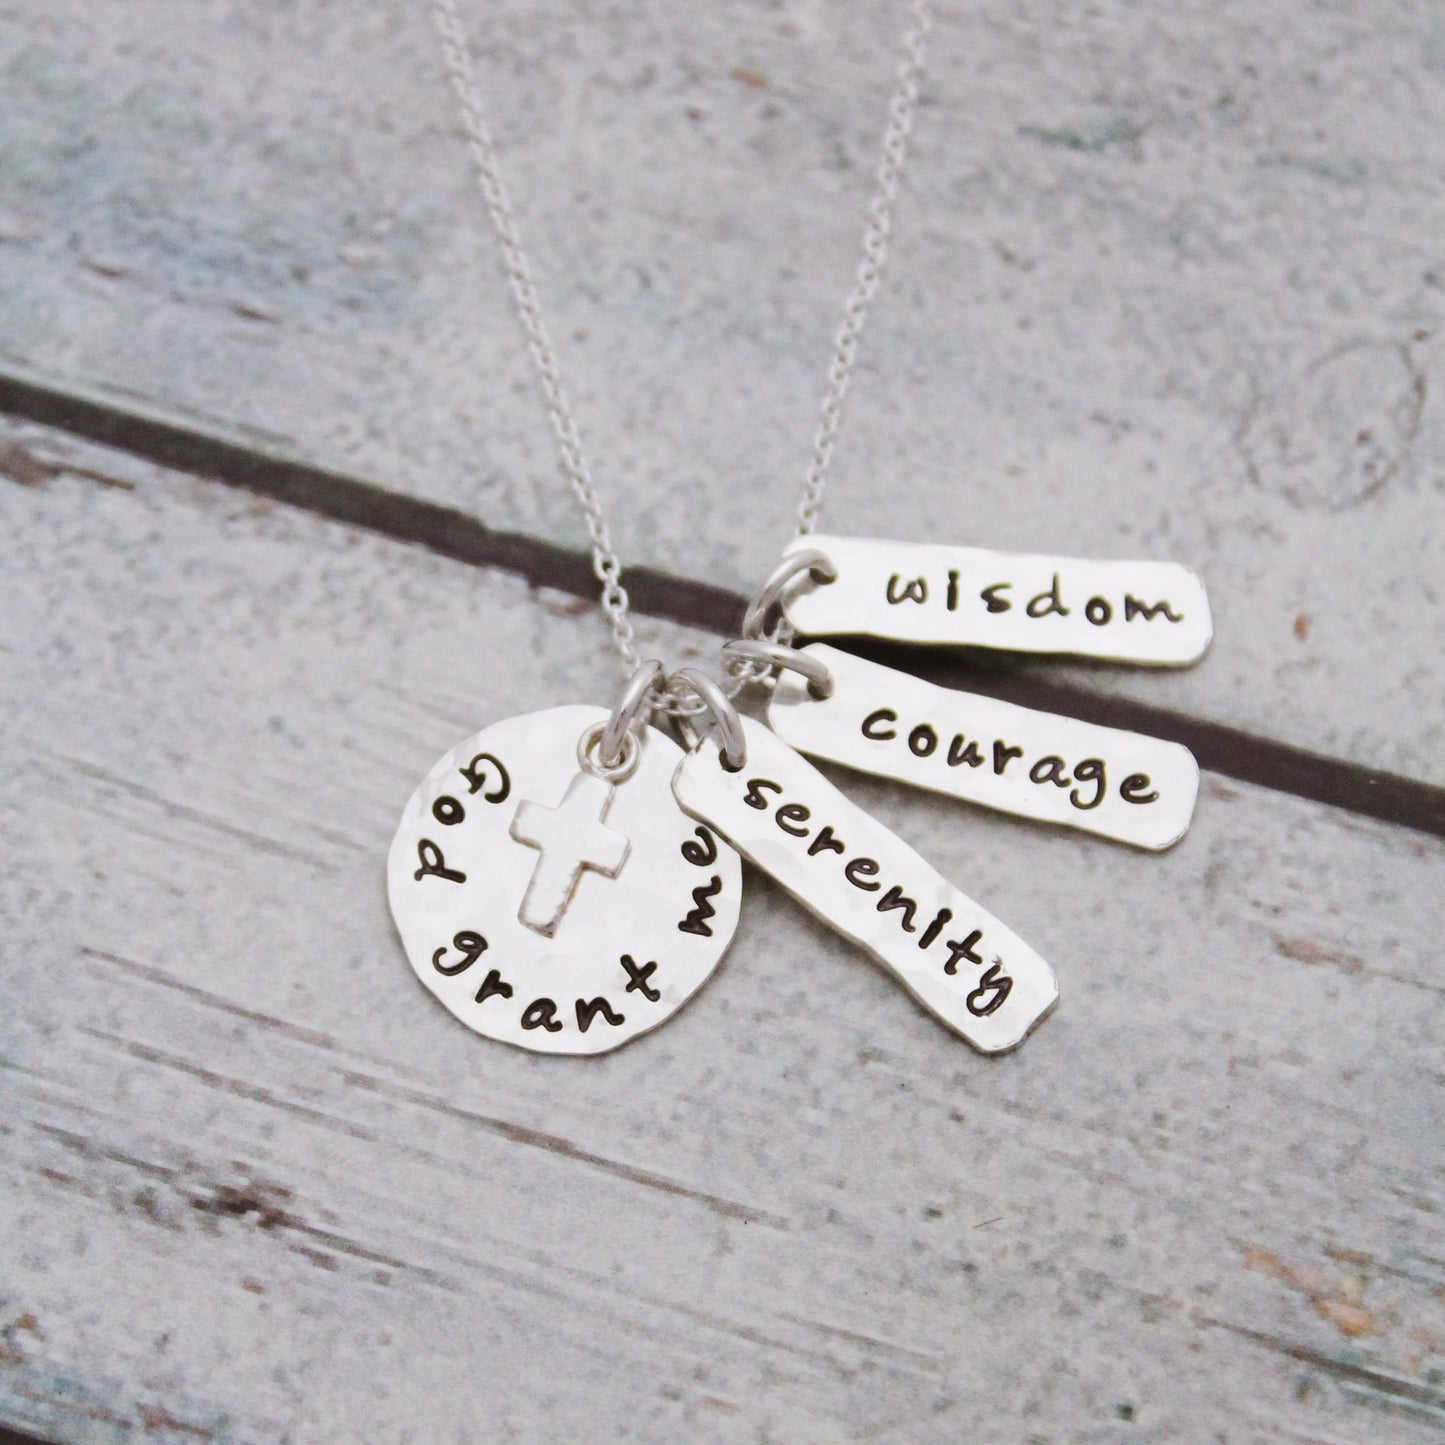 Serenity Prayer Pendant Necklace in Sterling Silver with Cross Charm, Personalized Hand Stamped Jewelry God Grant Me Wisdom Courage Serenity